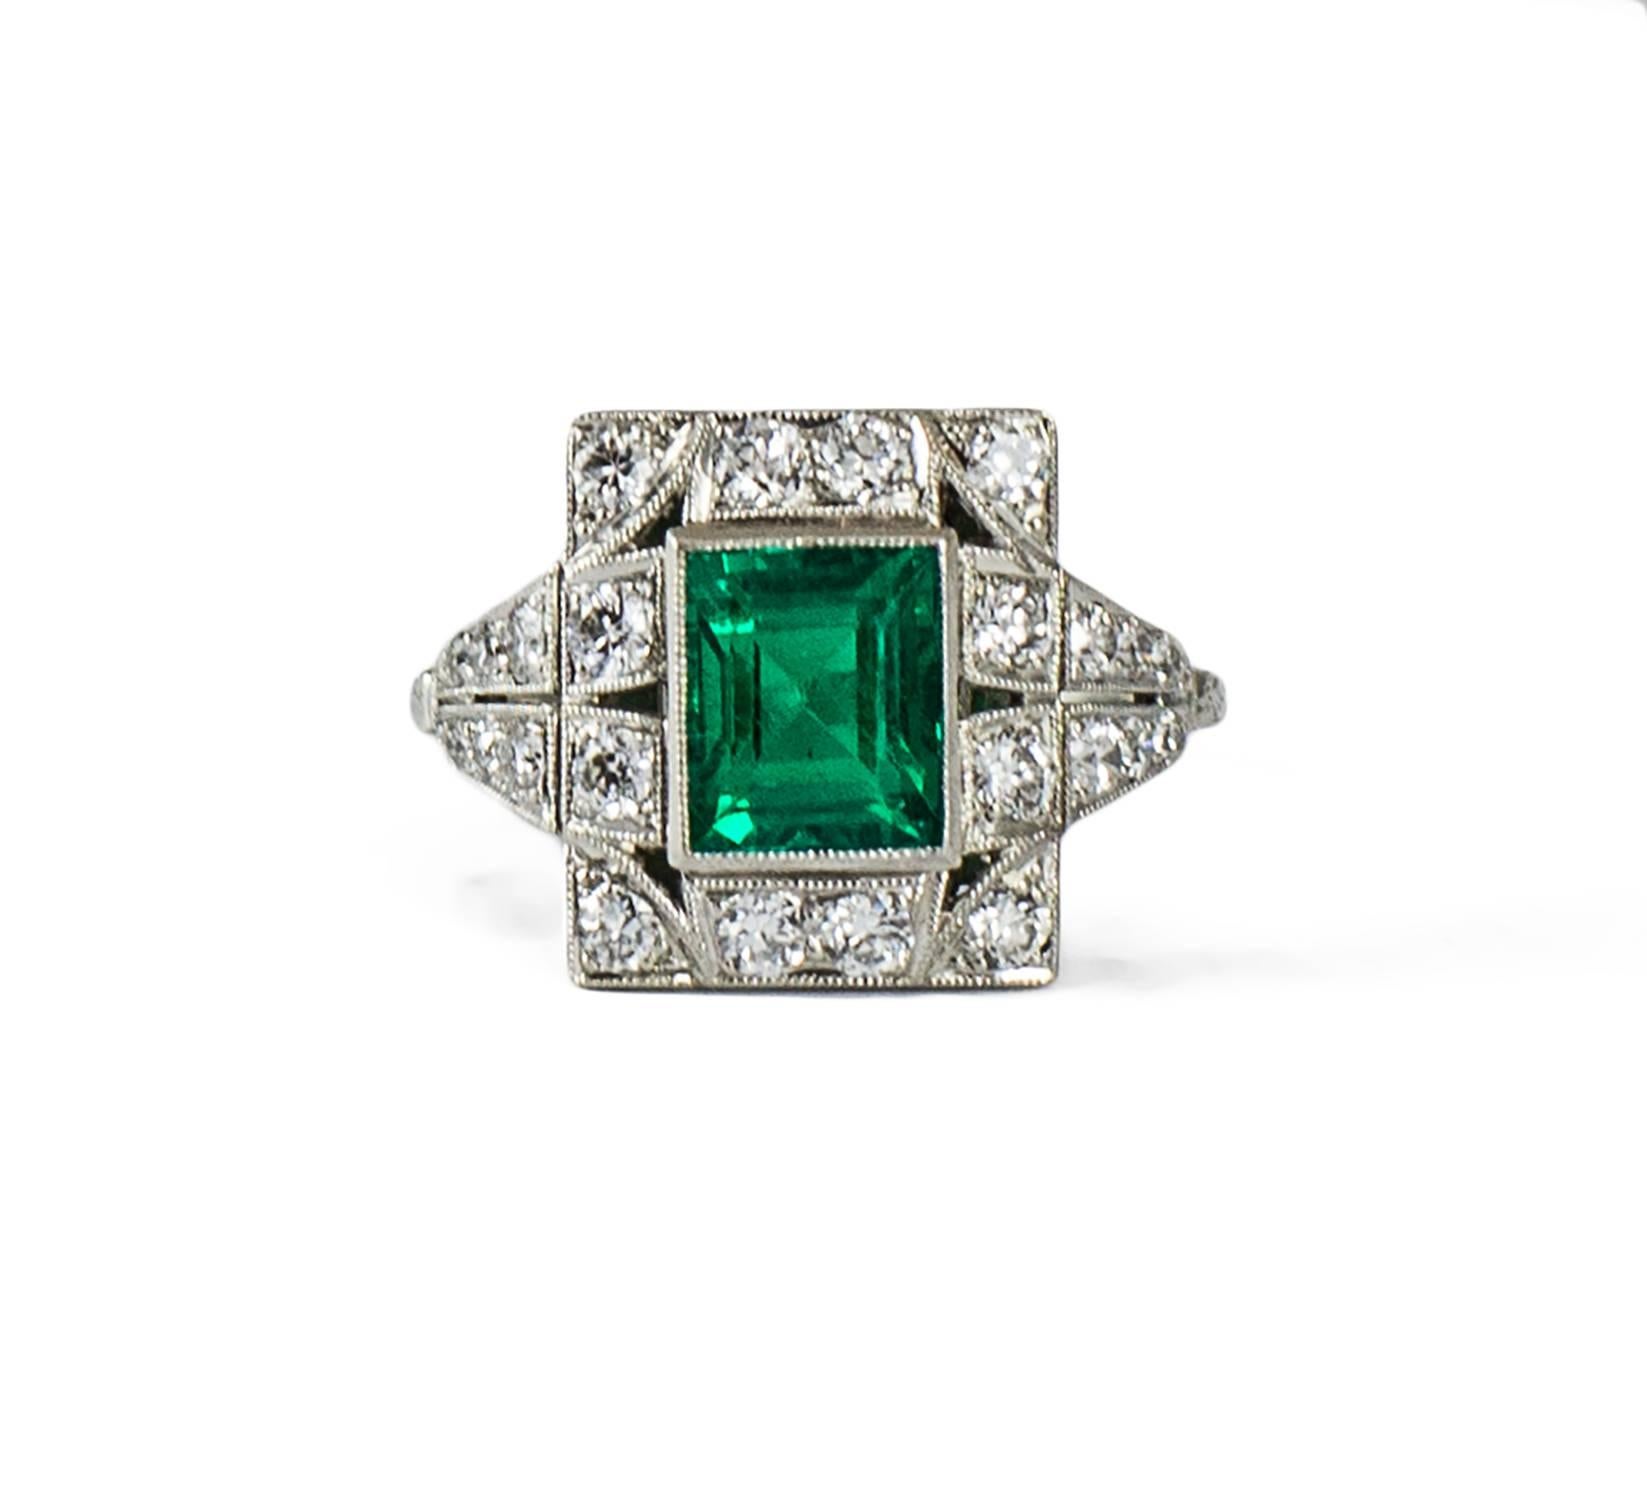 A simply lovely custom made Art Deco ring set in platinum and made circa 1930. The ring holds a vibrant deep transparent green emerald weighing 1.28 ct. tw. Additionally, there are 24 high quality bead set old European cut diamonds (G-H, VS-SI)